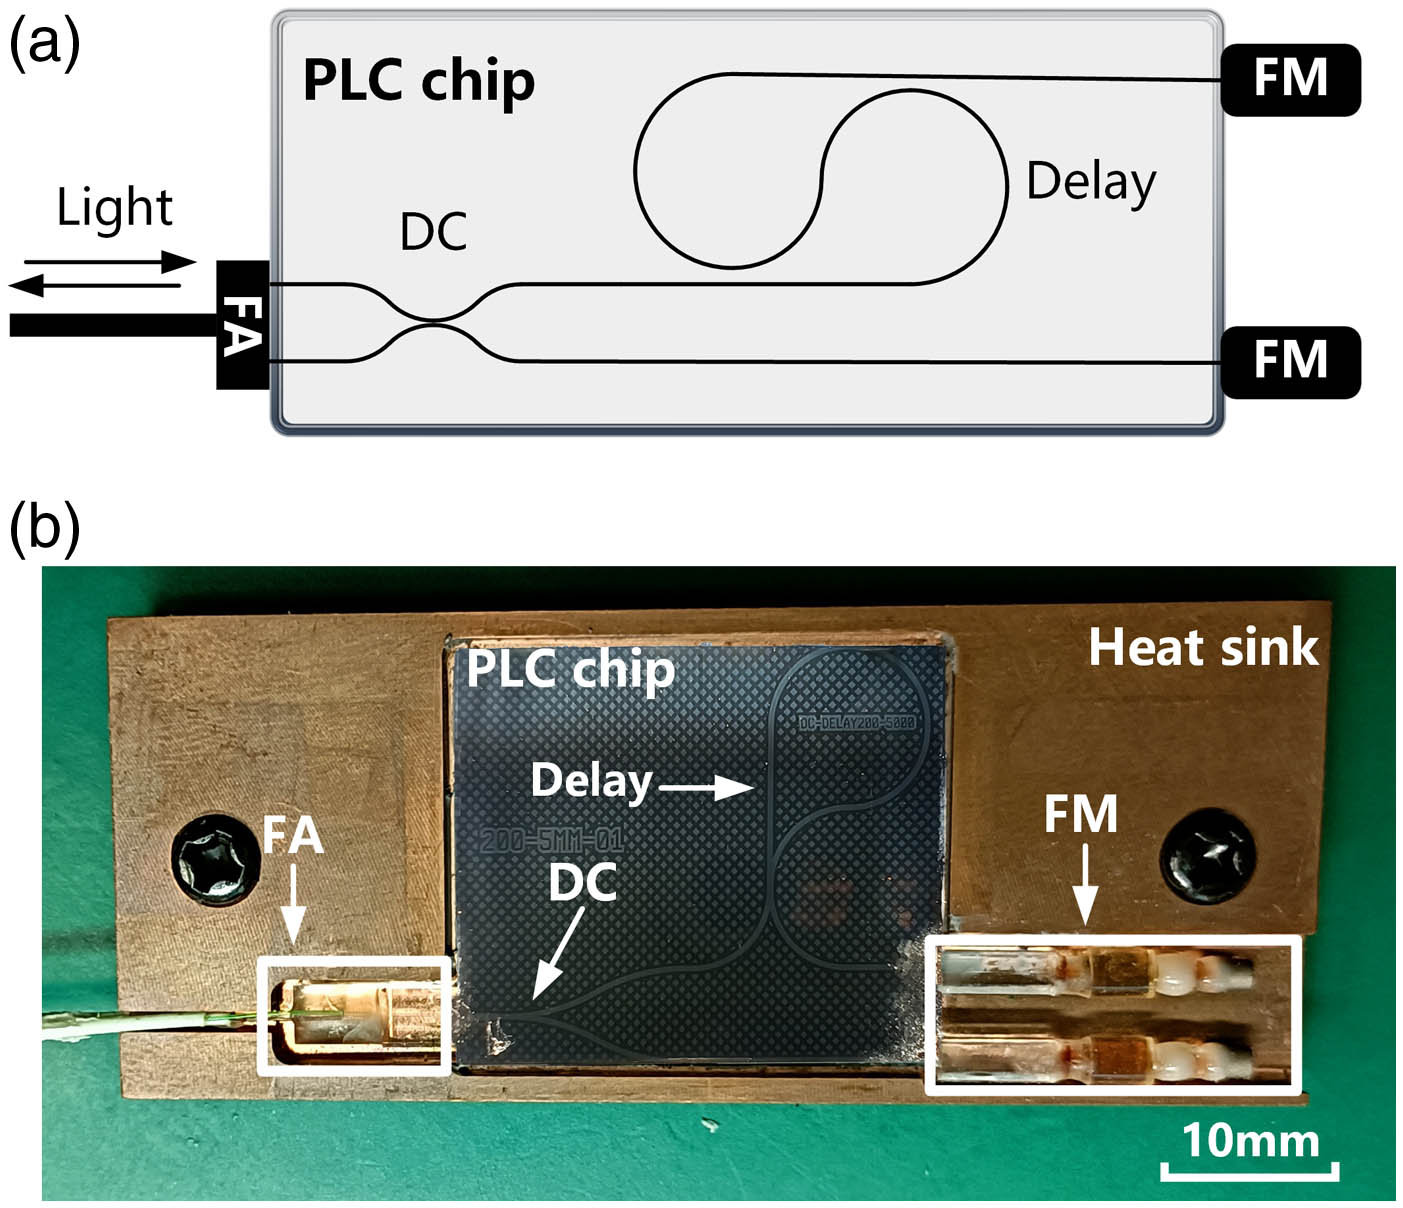 AFMI device. (a) Scheme of our AFMI. The interferometer combines an FA for photon coupling, a DC with the splitting ratio of 50:50, a 200 ps delay line, and two FMs; (b) photograph of our AFMI. The size of the chip is about 27.8 mm×23.1 mm, and the length of the FM is about 17.5 mm. A copper heat sink with a TEC and a thermistor is attached to the back of the chip. The entire system is packaged in an aluminum box with temperature isolation (not shown in this figure).